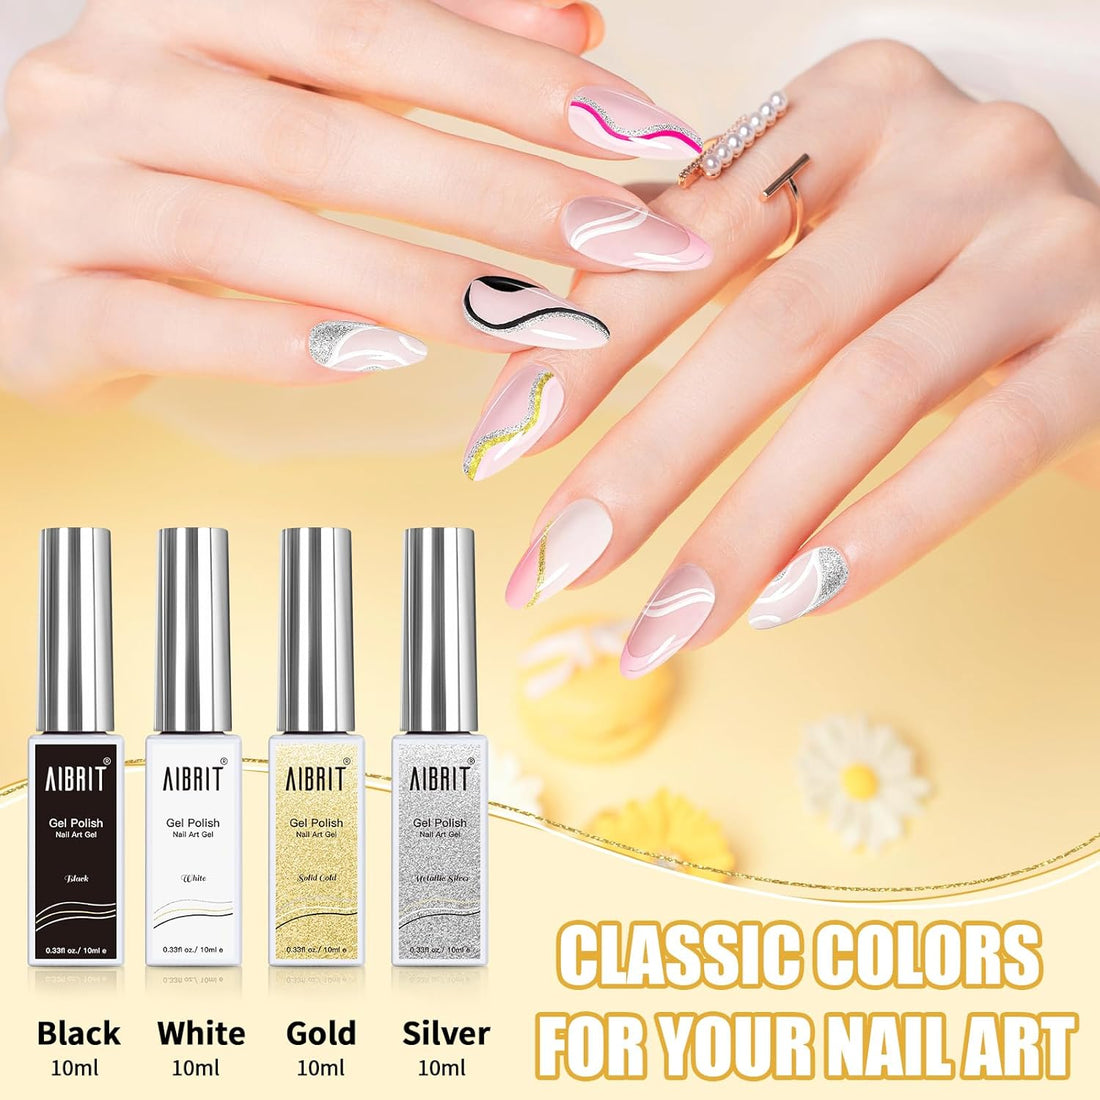 Gel Liner Art Polish Set 10Ml, 4 Colors Black White Gold Silver Design Paint with Thin Brush in Bottle for Swirl/ Euphoria French Tips Manicure Painting DIY at Home